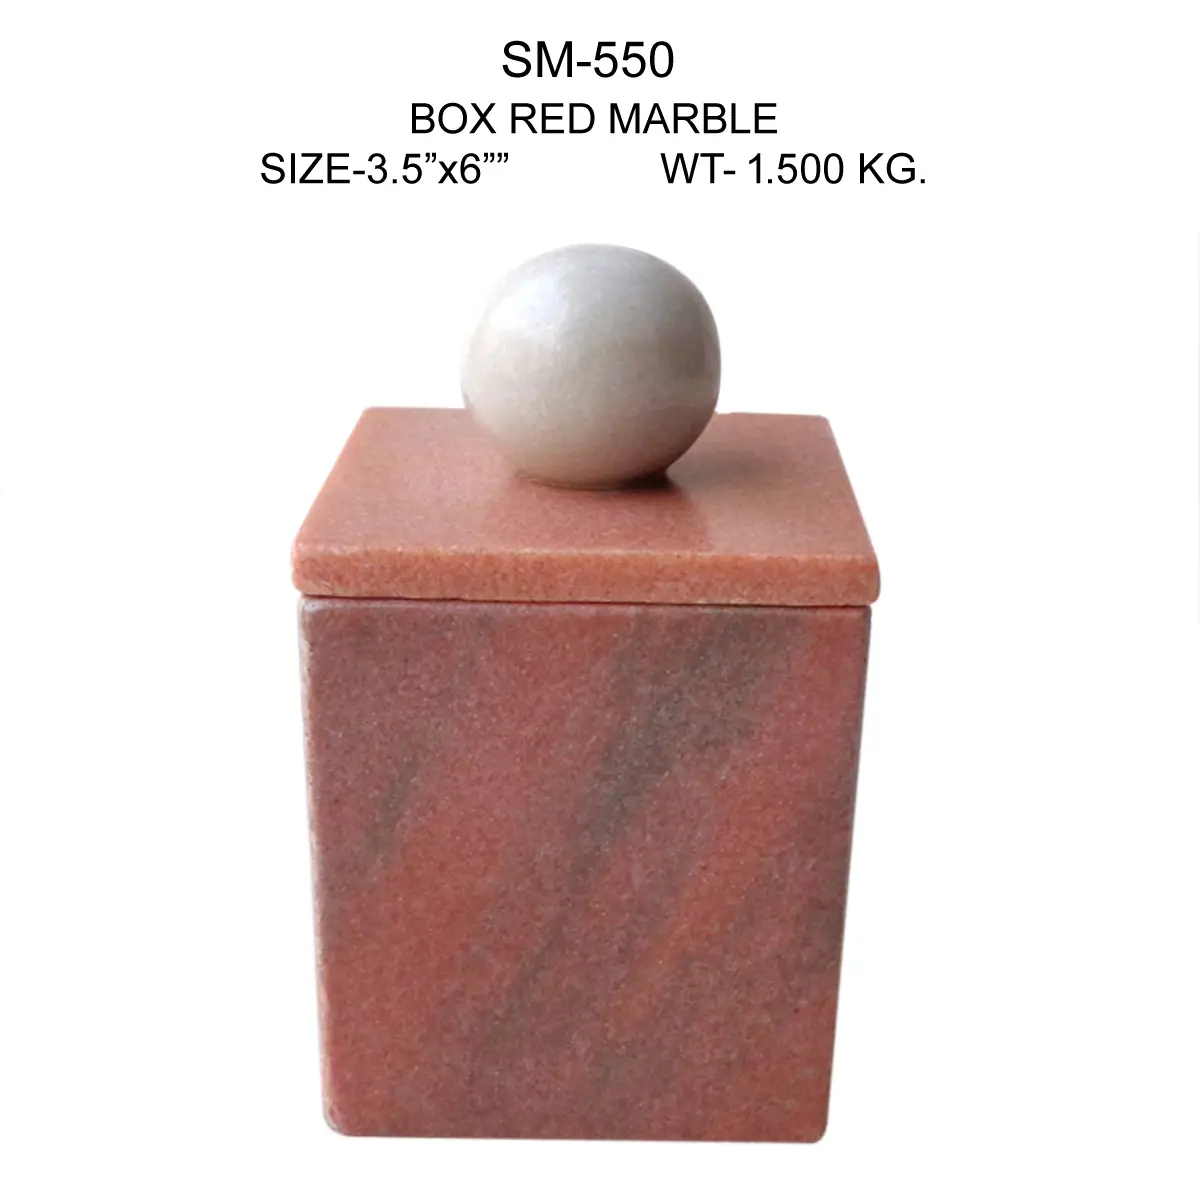 RED MARBLE BOx STYLE-6